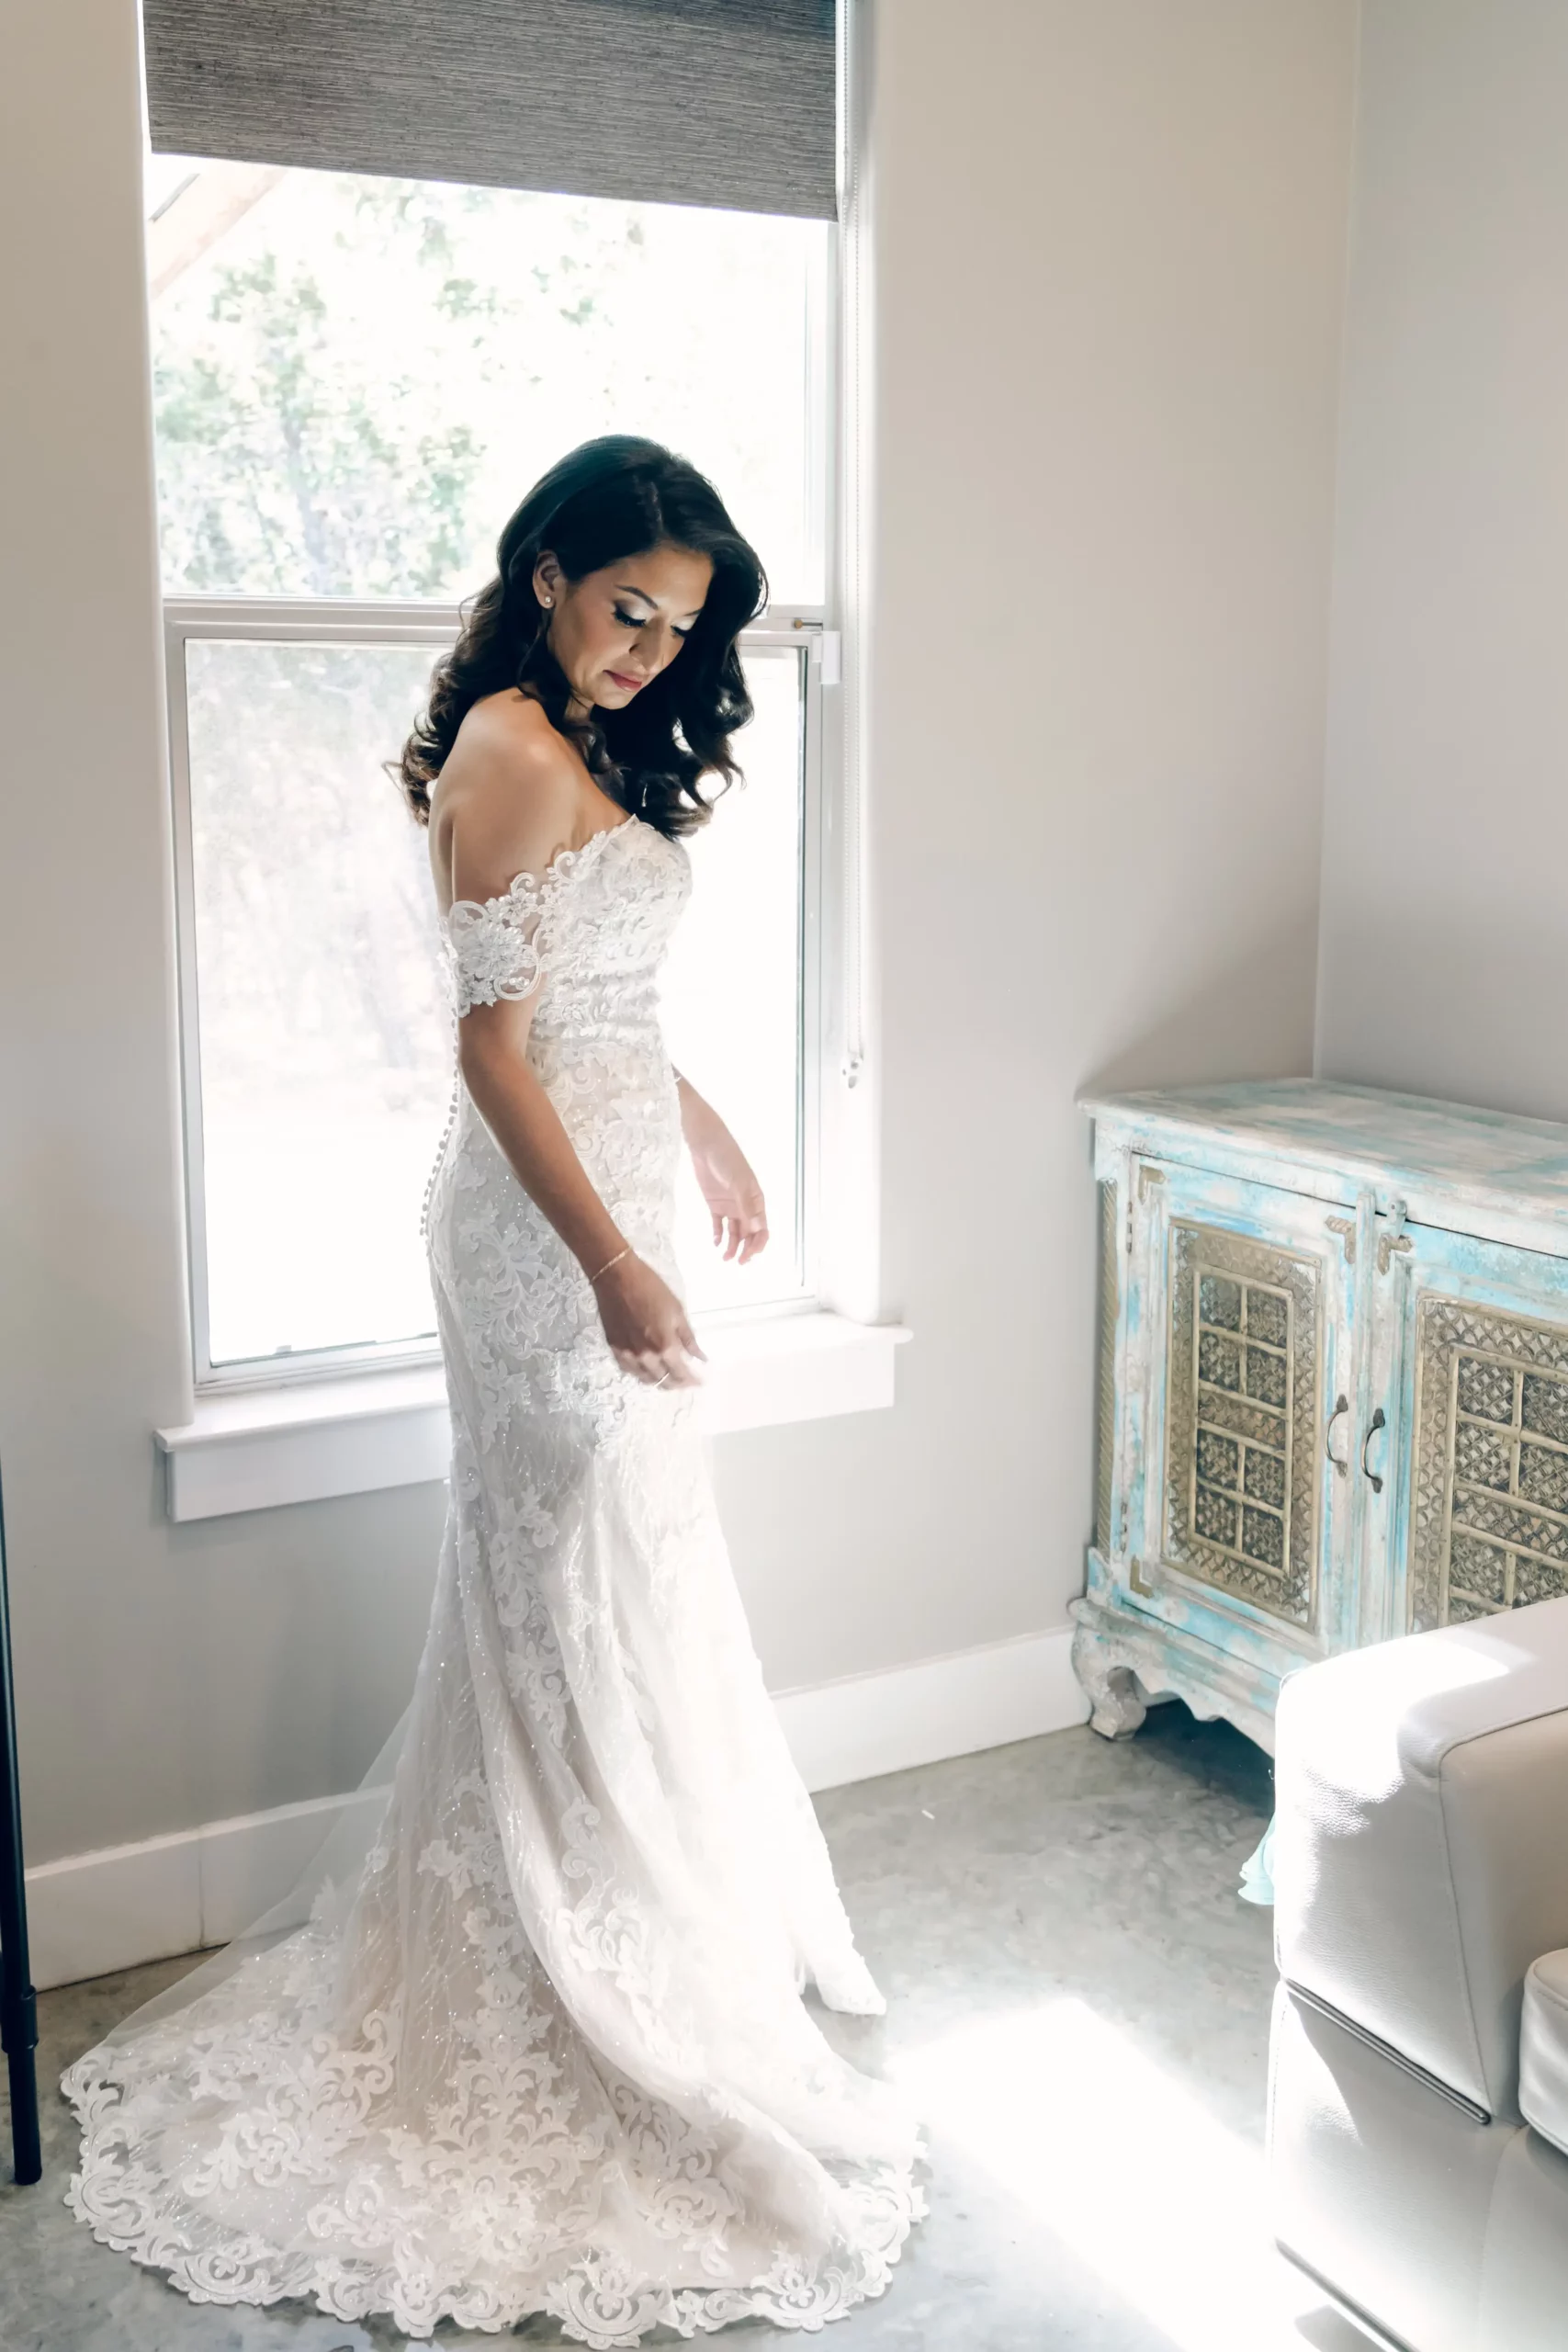 The bride stands in front of a window in her bridal suite waiting to getting married